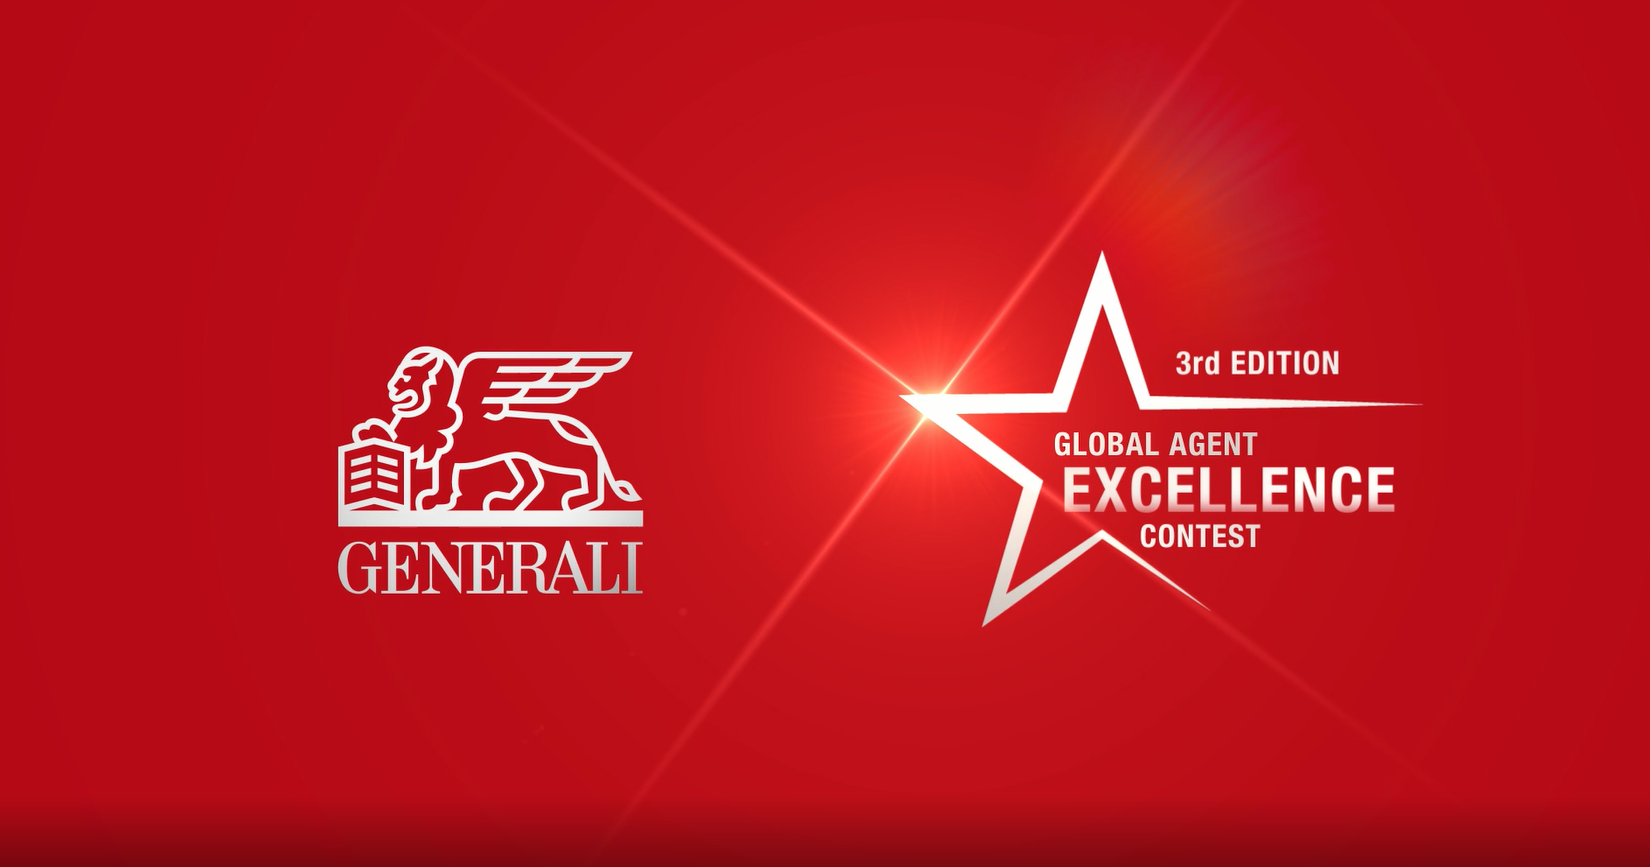 Generali Global Agent Excellence Contest 3rd Edition - Global Agent Excellence Contest 2020